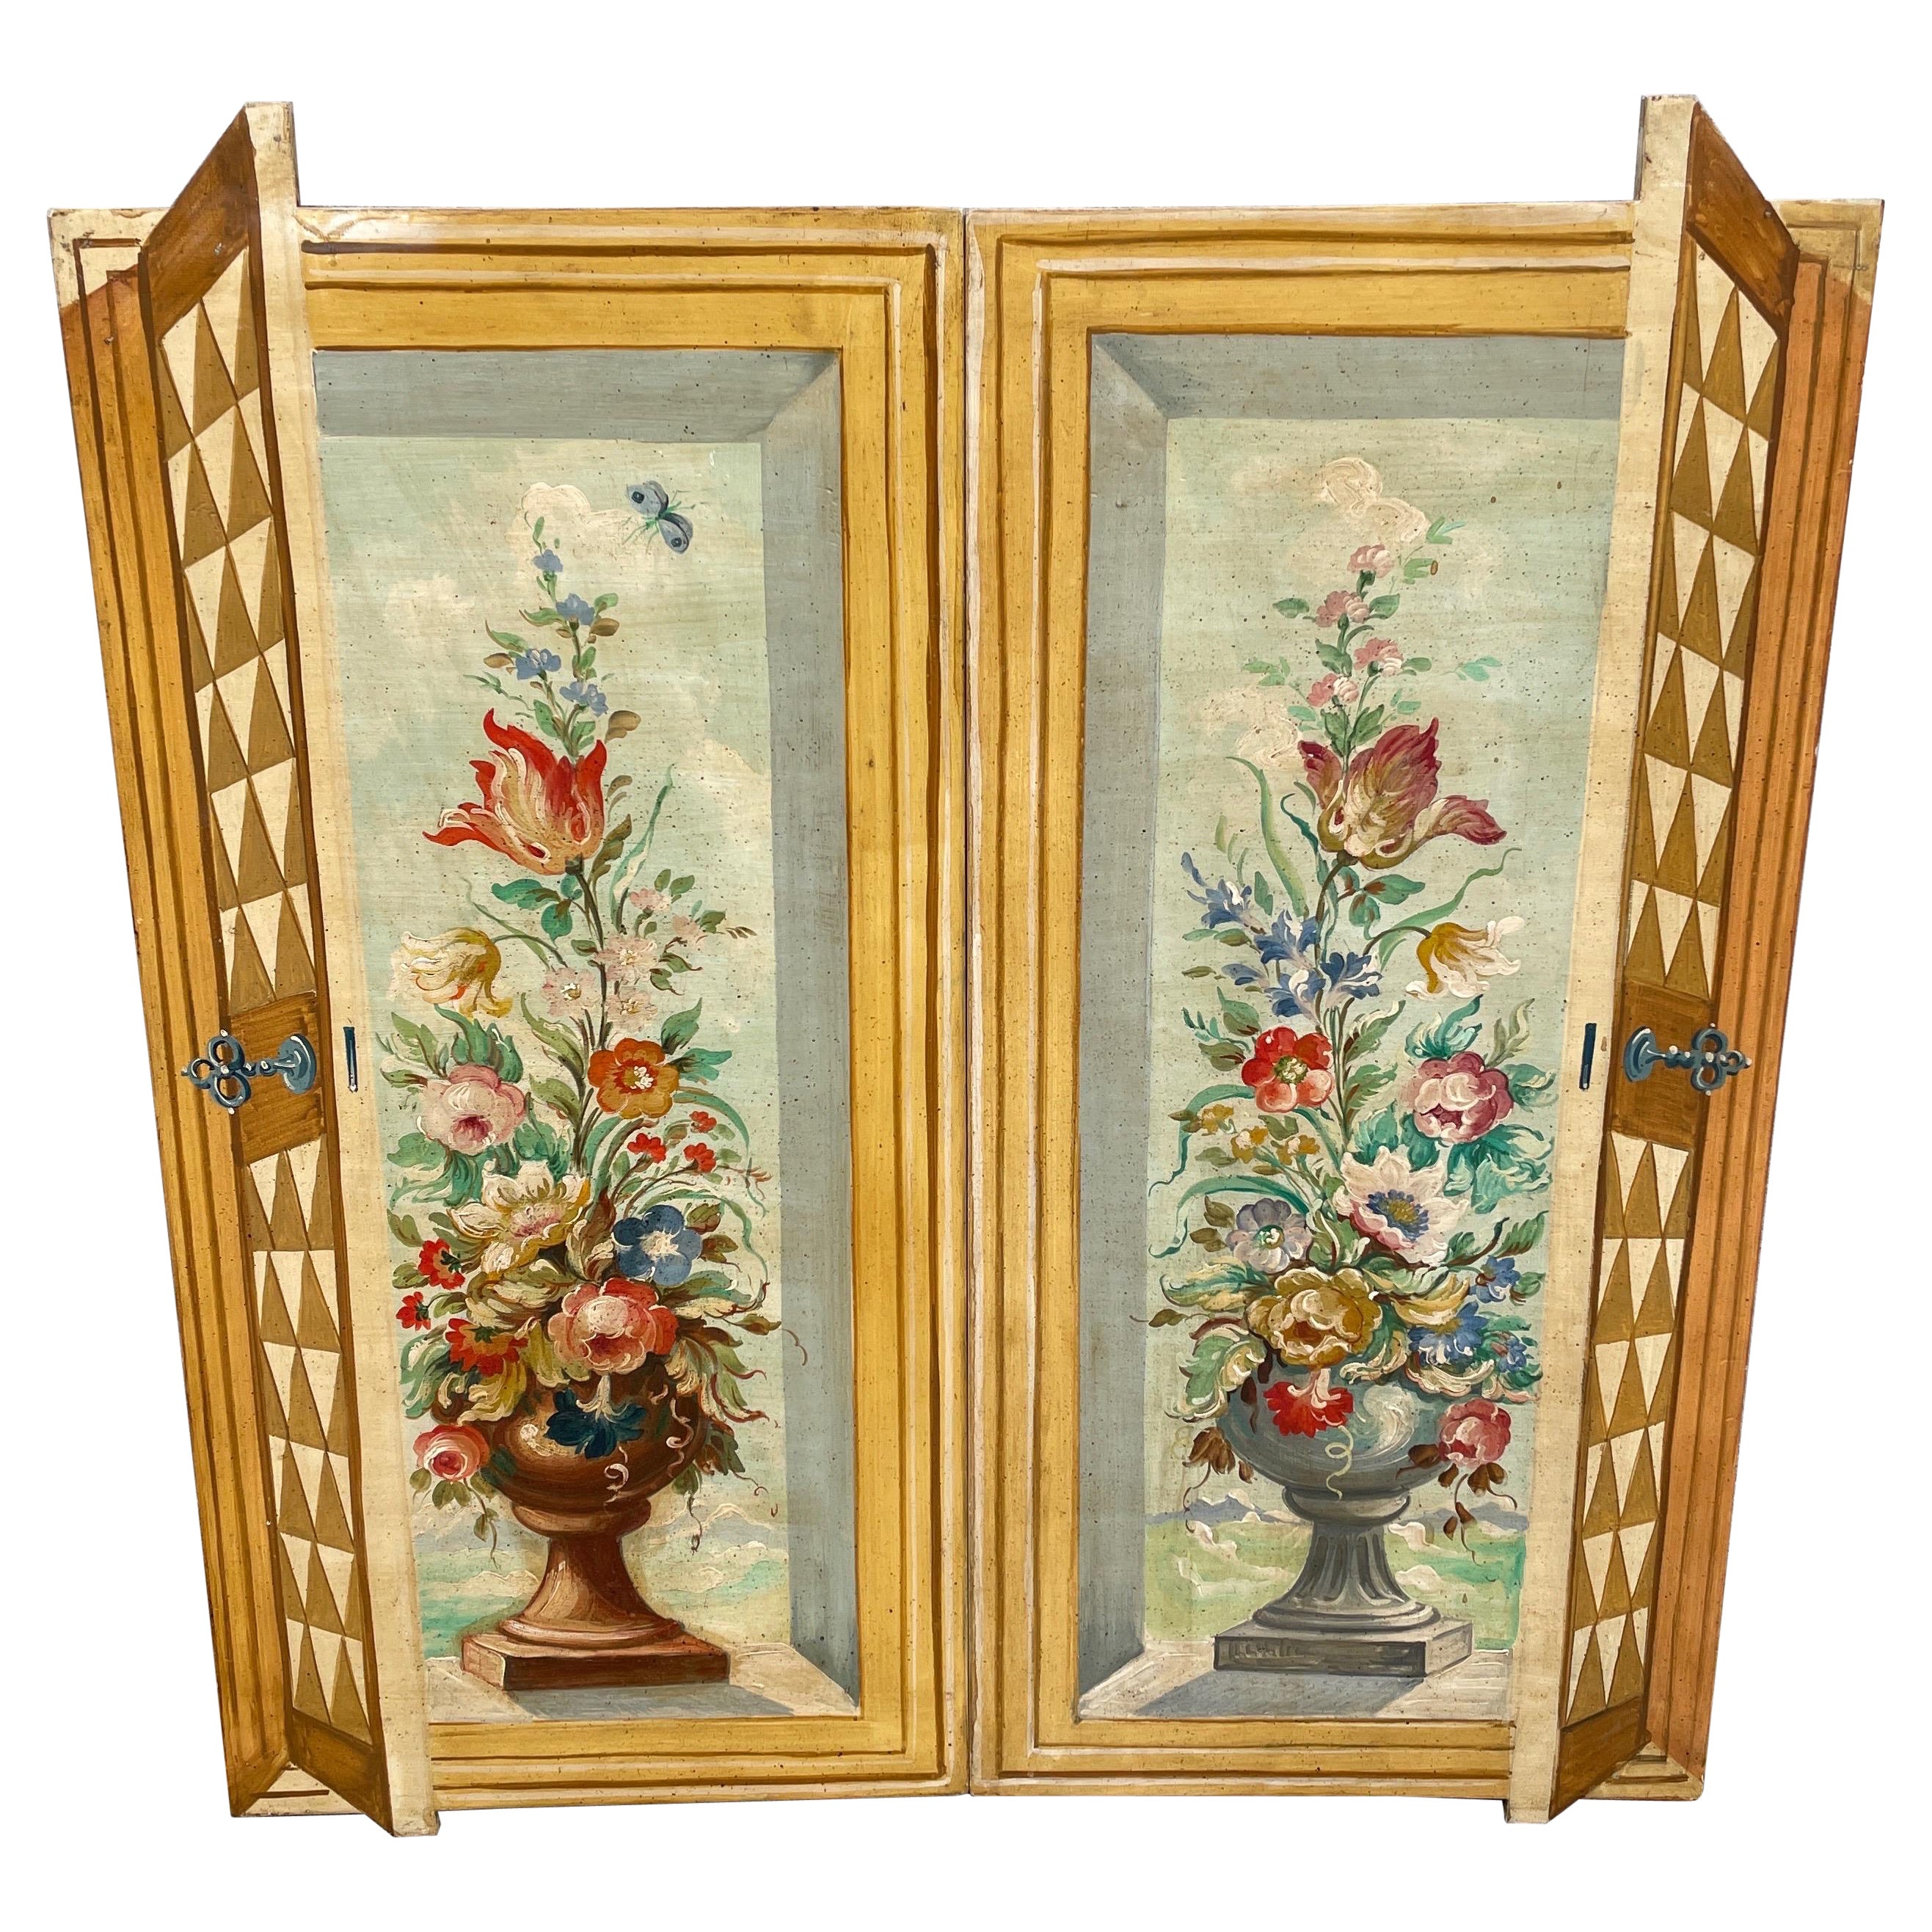 Hand Painted Pair of Trompe L'oeil Wood Wall Plaques